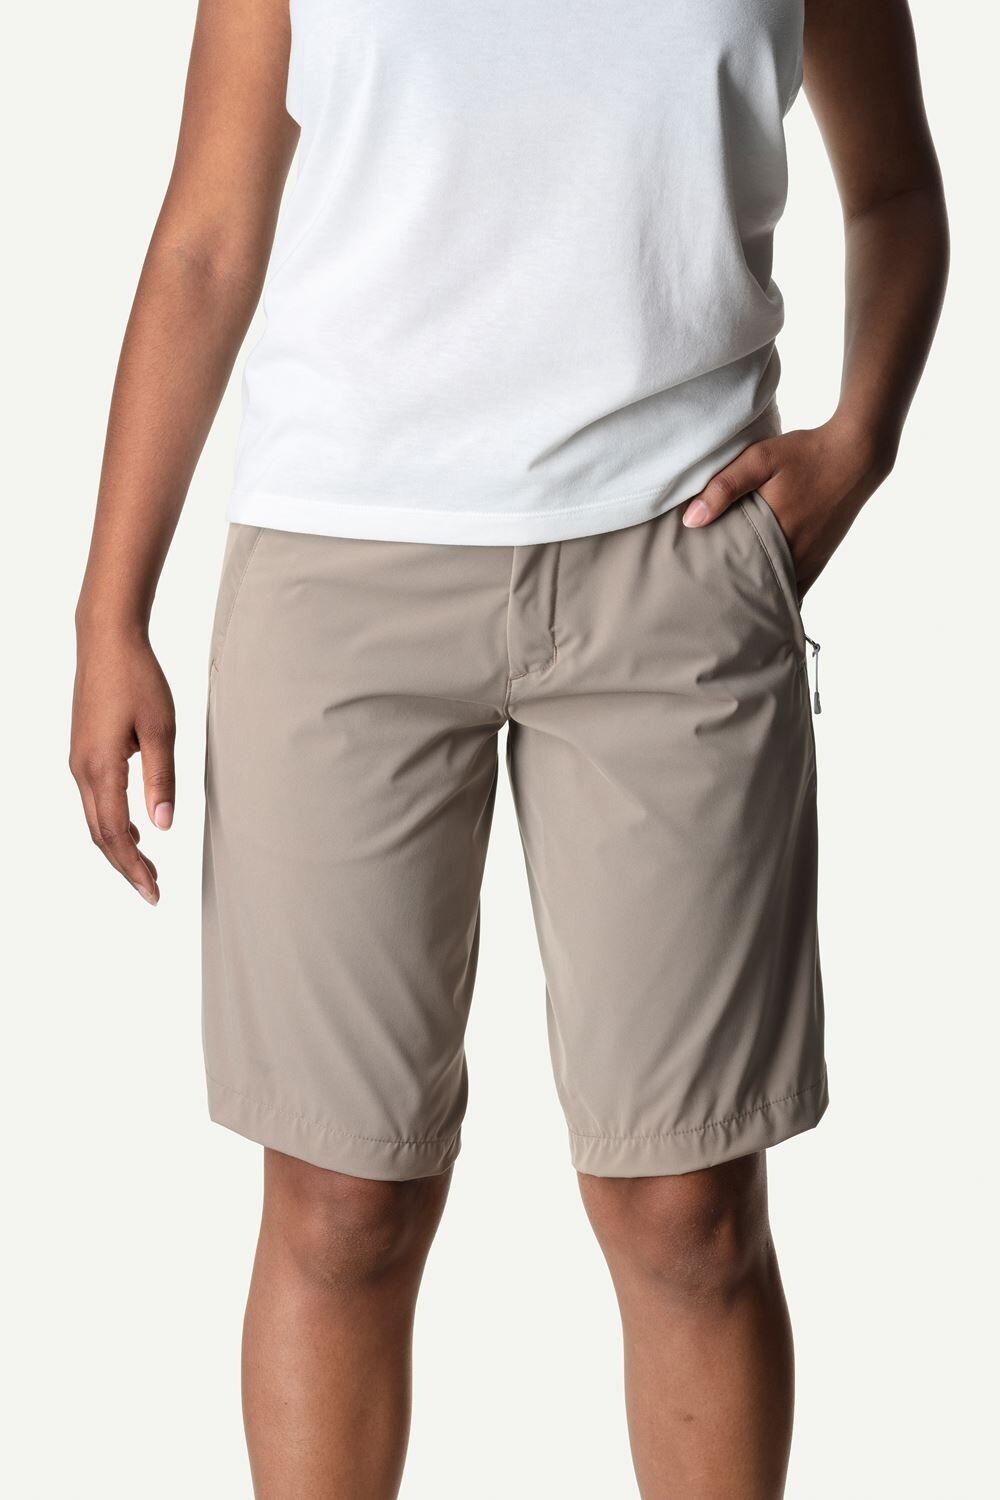 Houdini MTM Thrill Twill Shorts, dame Reed Beige 197554 S 2019